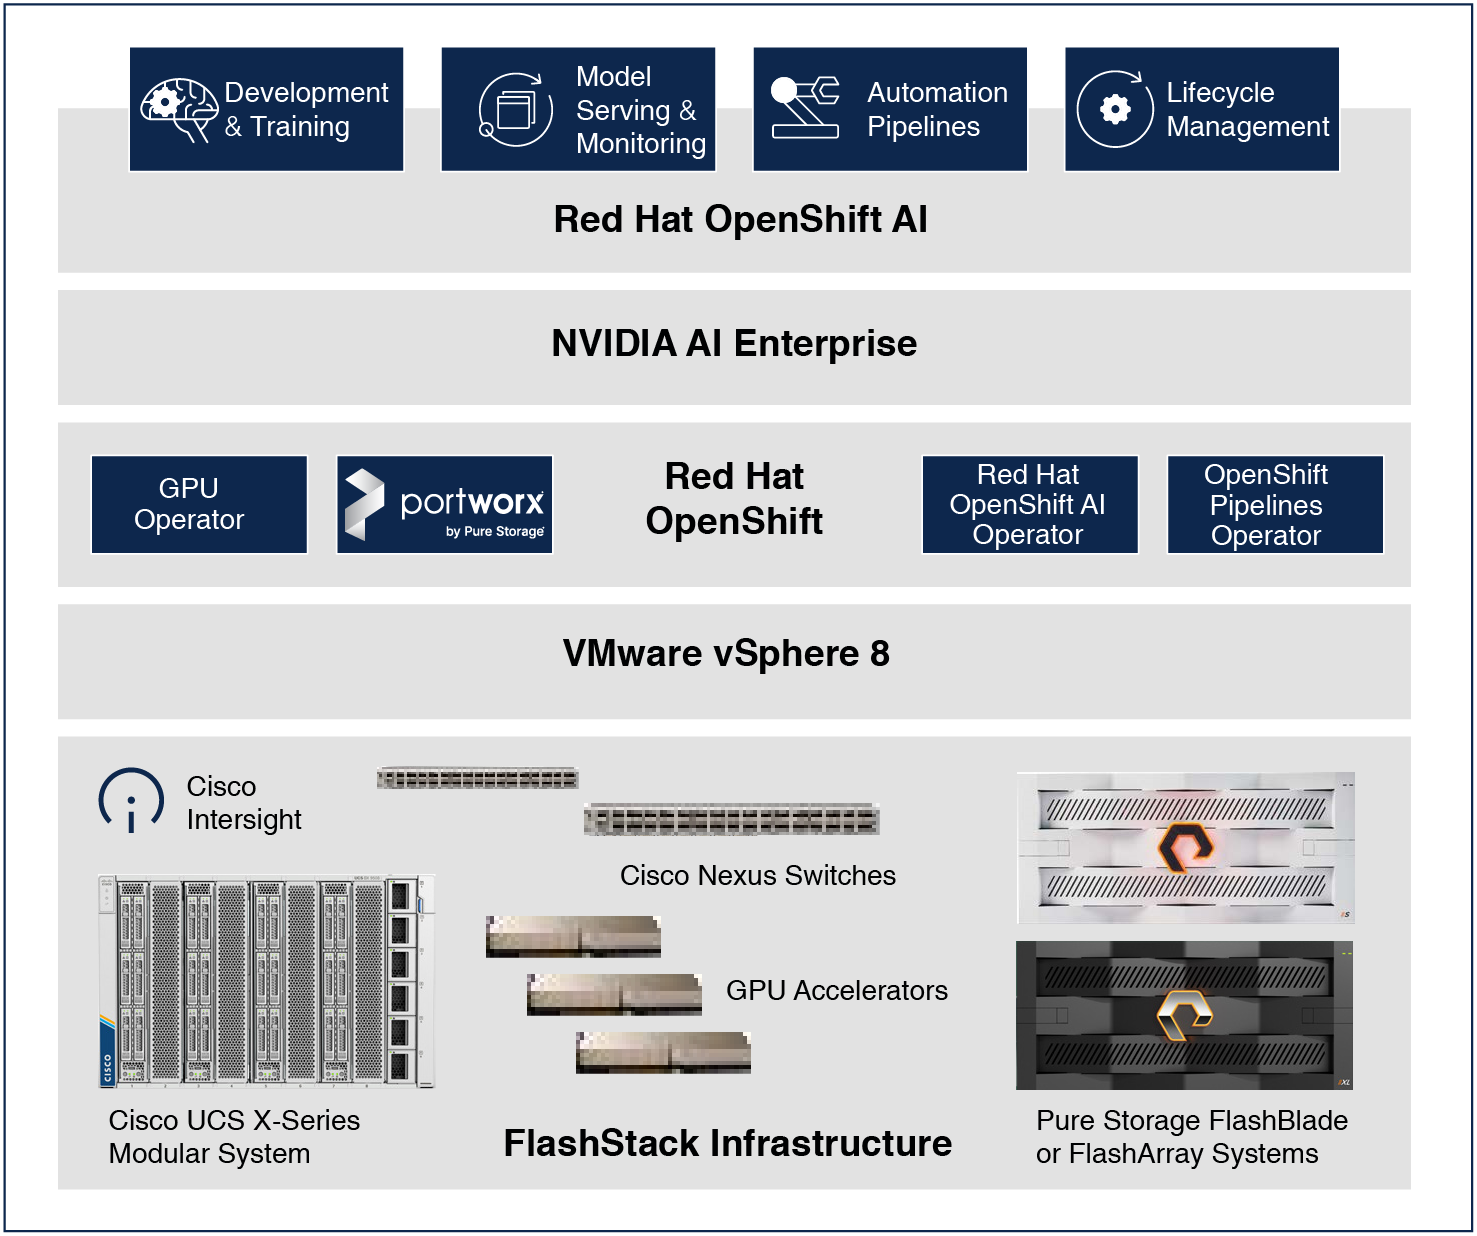 Architecture for MLOps using Red Hat OpenShift AI